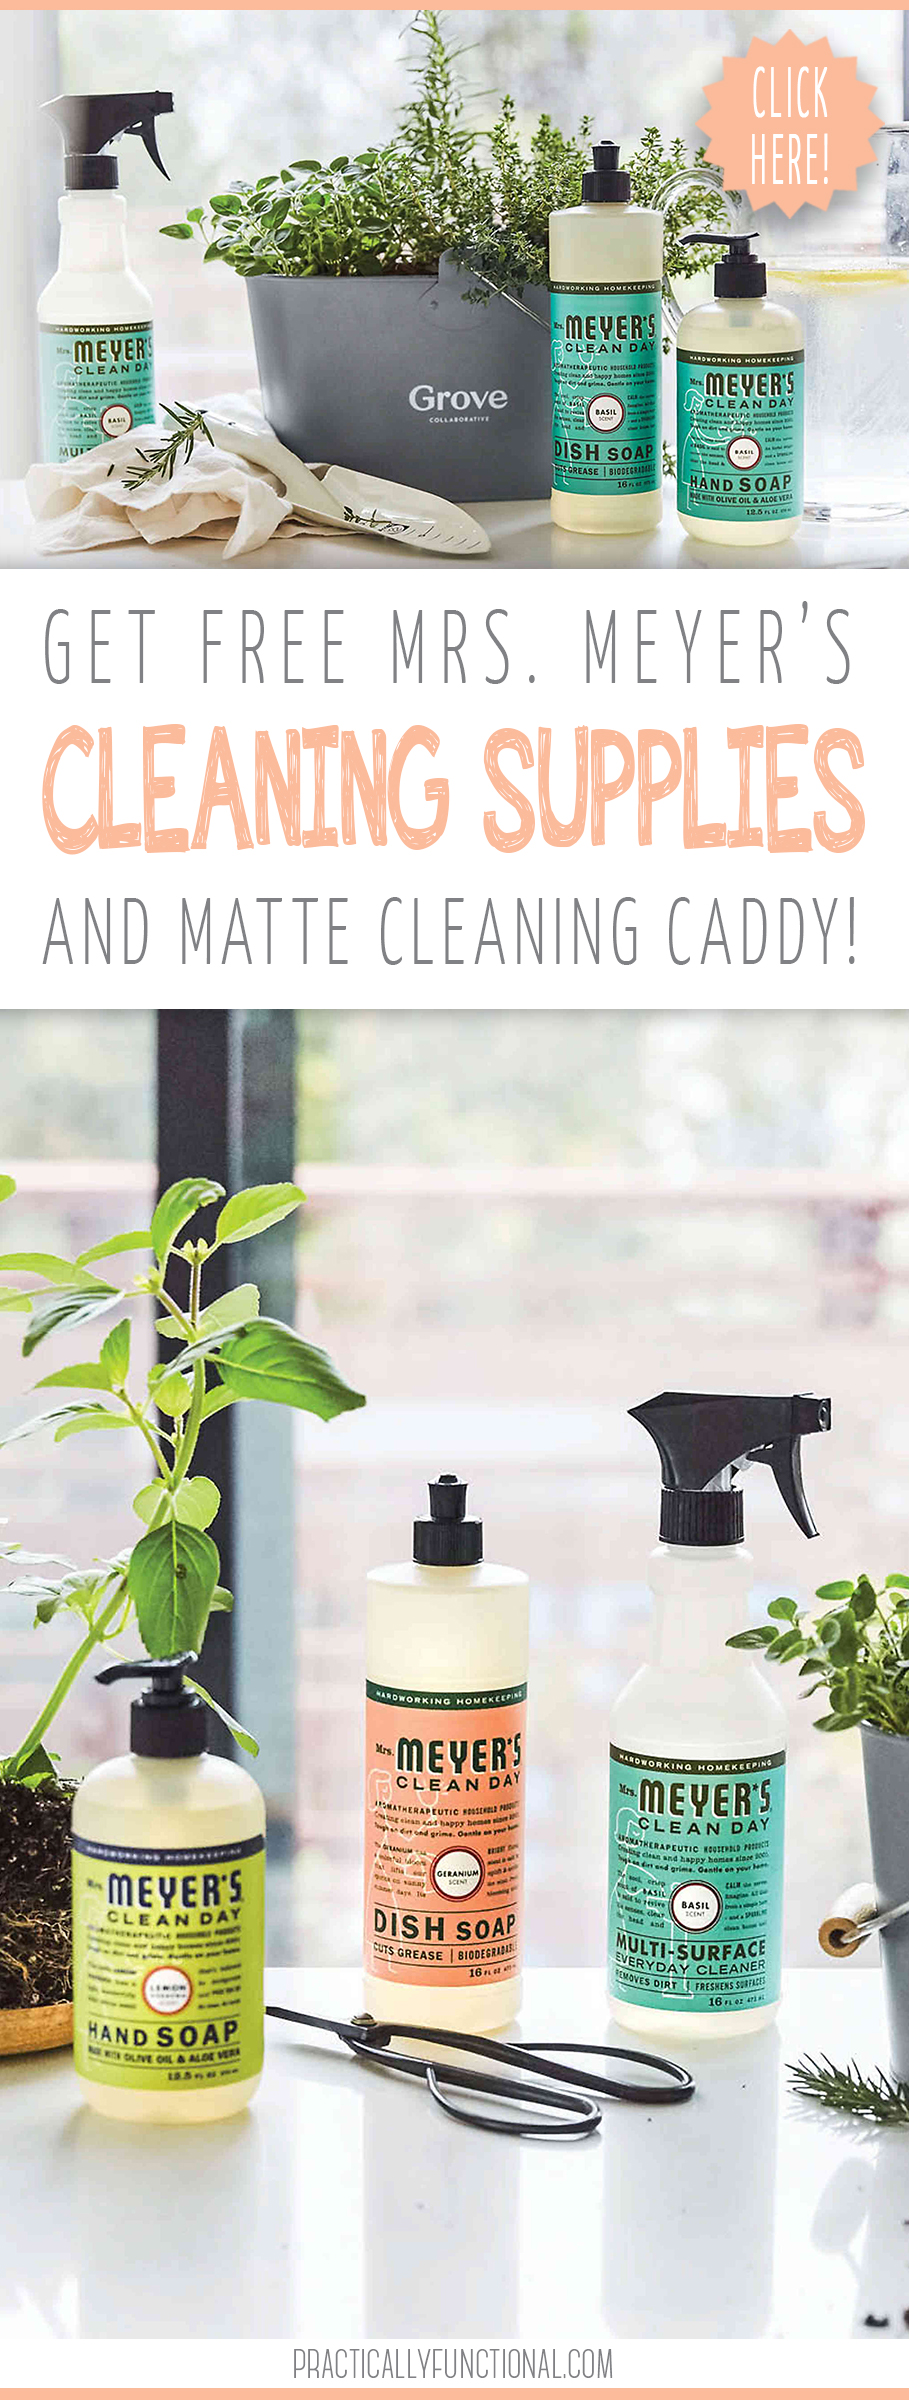 Free mrs. meyers cleaning products and caddy from grove collaborative pin